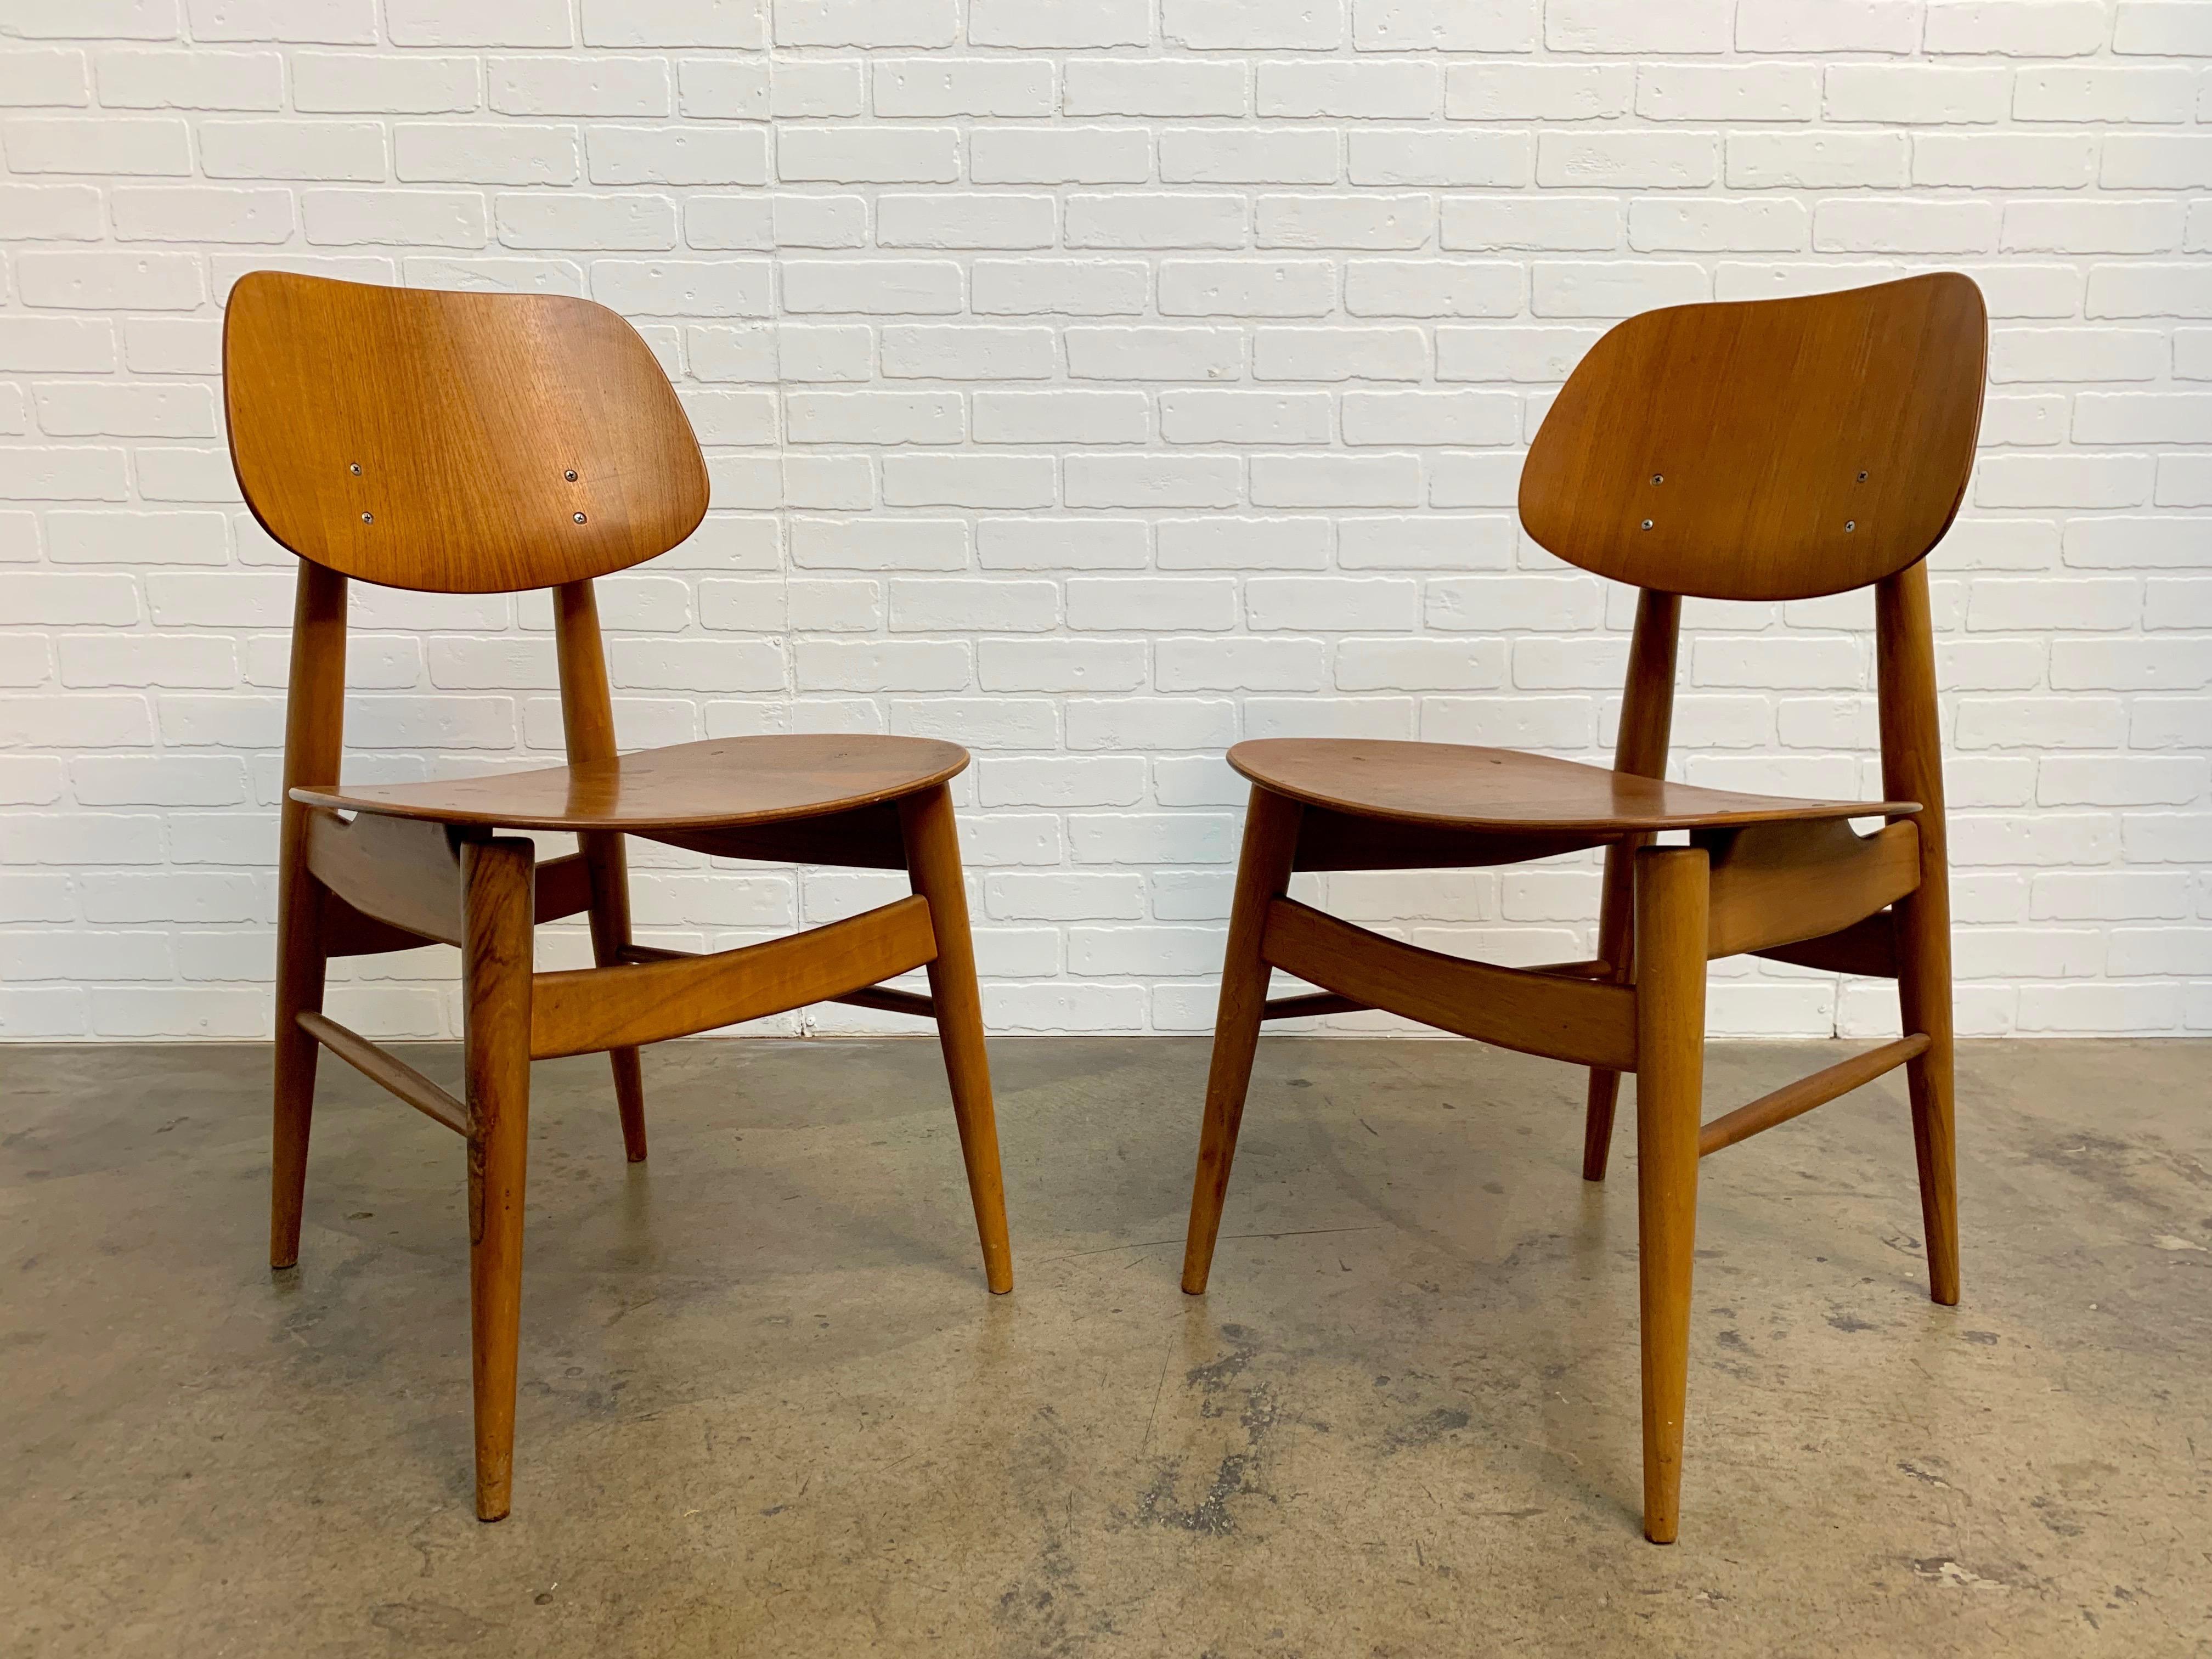 Pair of walnut bentwood dining or side chairs by Thonet.